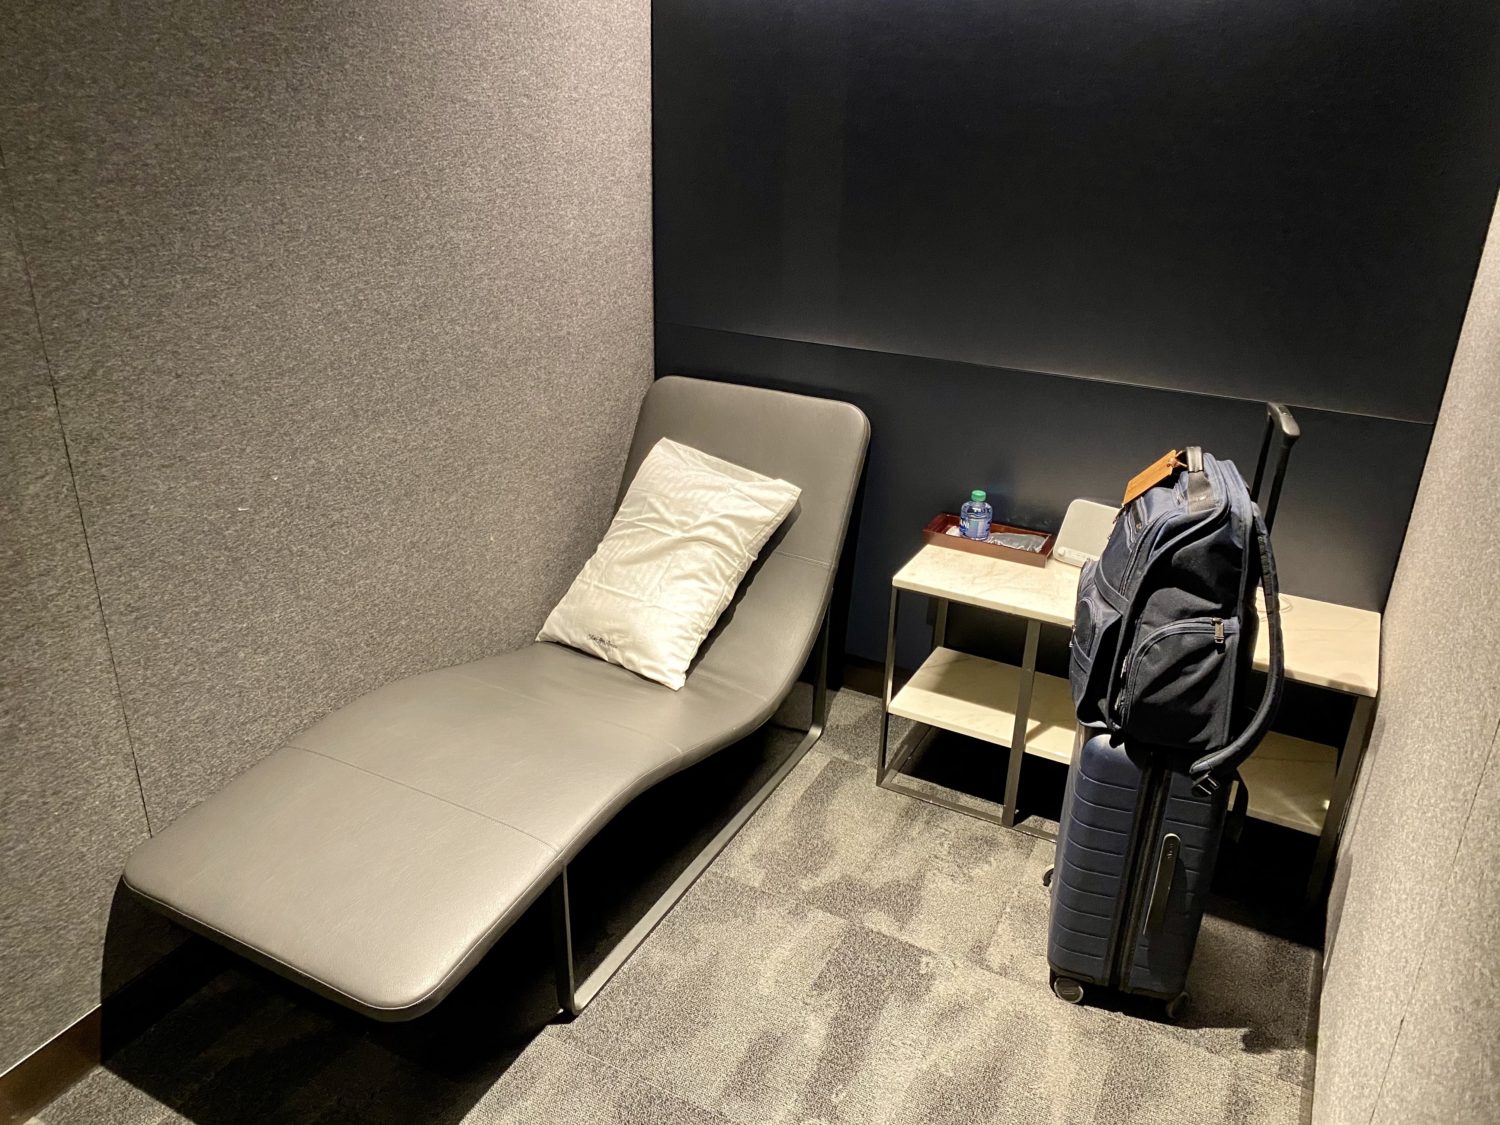 quiet room at united polaris lounge newark  Beautiful But Busy: United Polaris Lounge Chicago-O&#039;Hare (ORD) Review – Thrifty Traveler &#8211; Thrifty Traveler united polaris lounge newark quiet room scaled